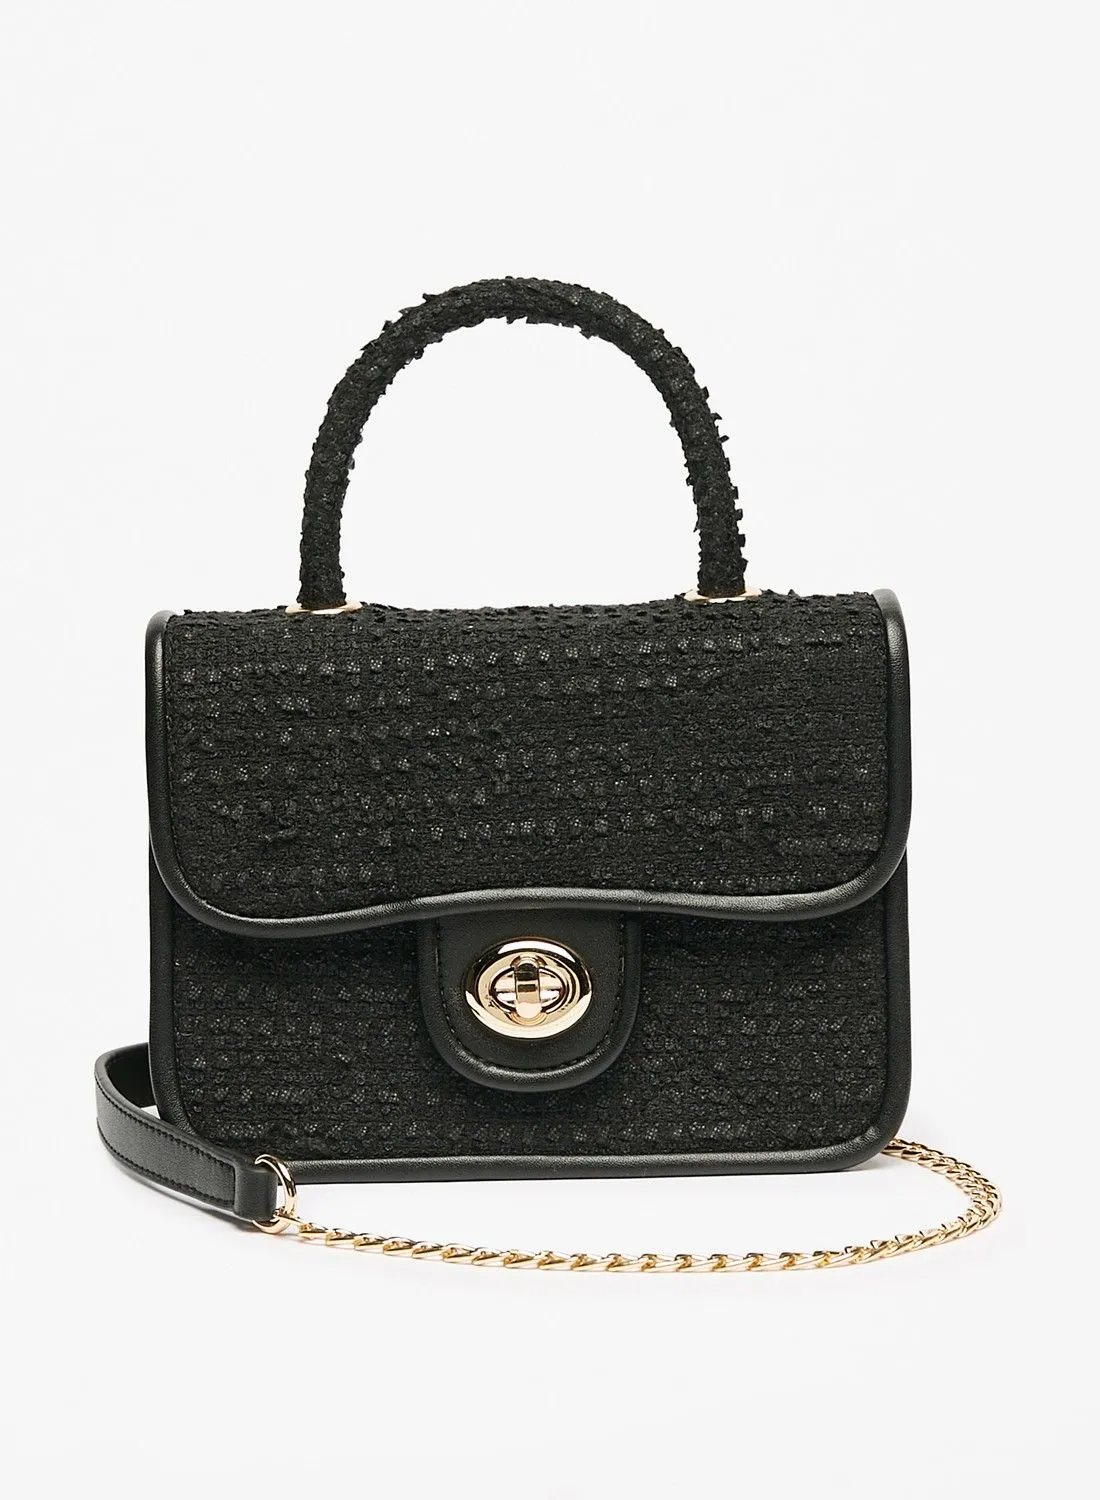 Flora Bella By Shoexpress Womens Textured Satchel Bag with Chain Strap and Metallic Twist Clasp Ramadan Collection